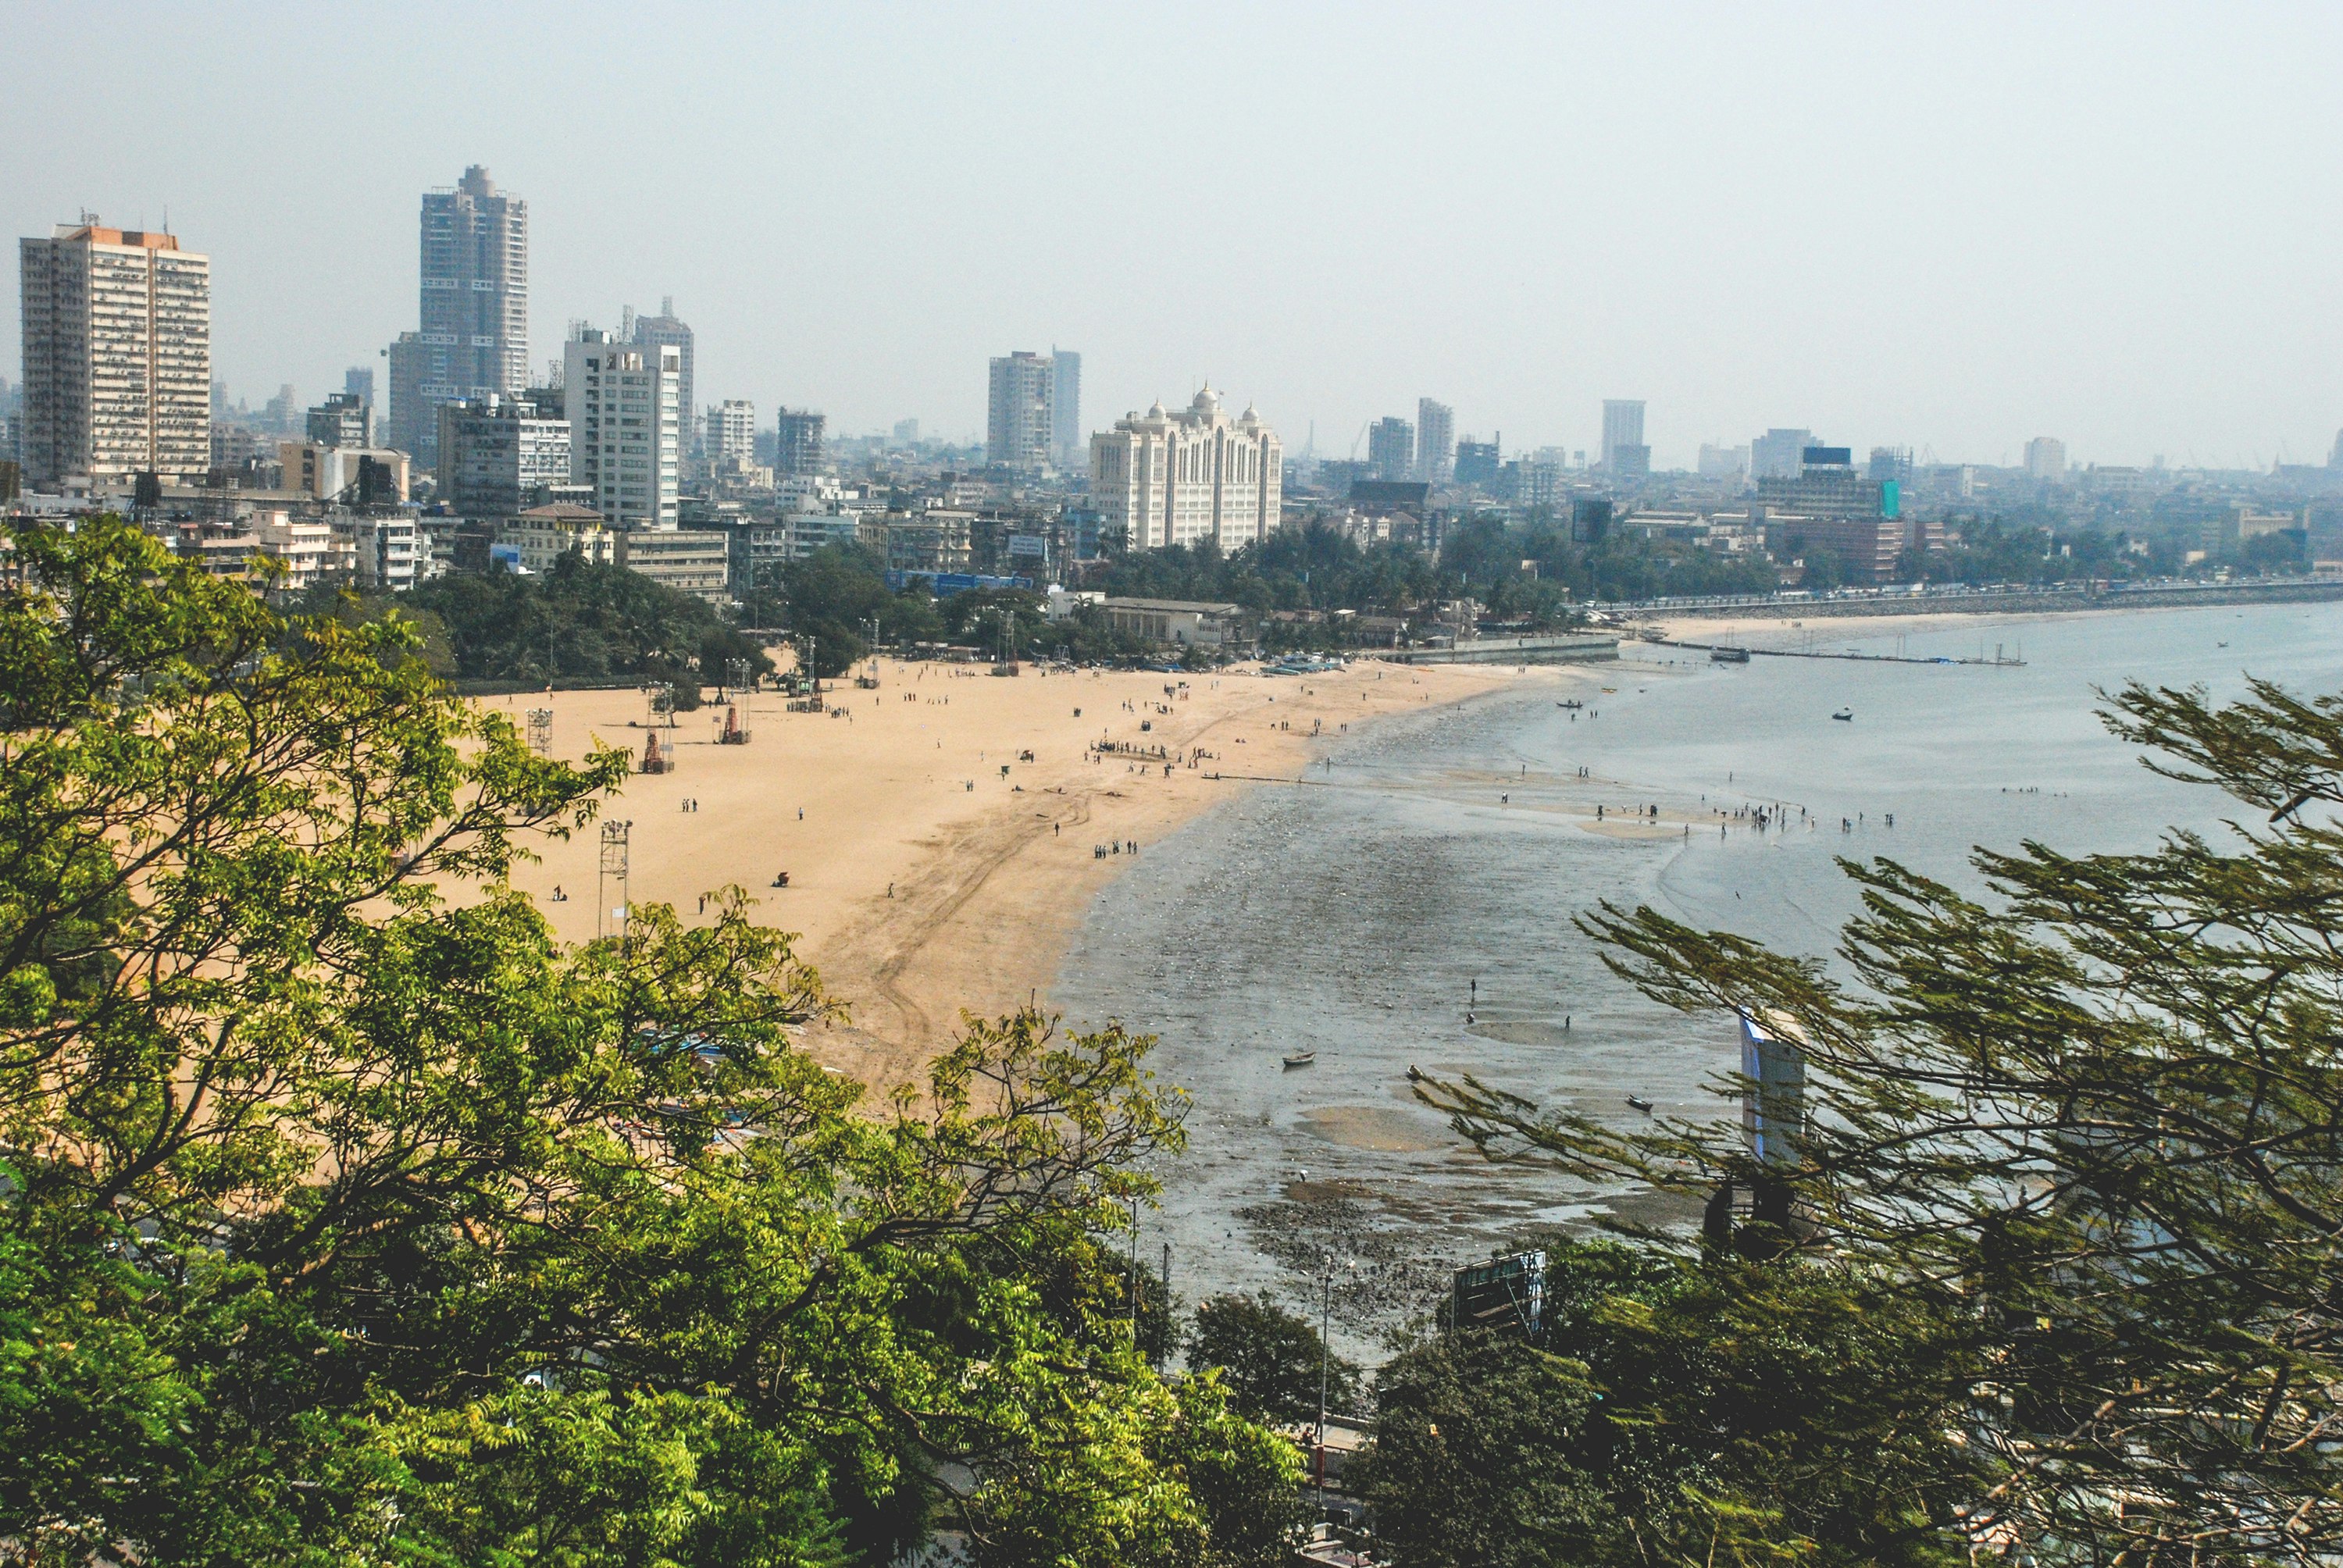 A view overlooking Juhu Beach with the Mumbai cityscape in the background. The photo is framed by green foliage. Crowds of people are visible on the wide slab of sand.